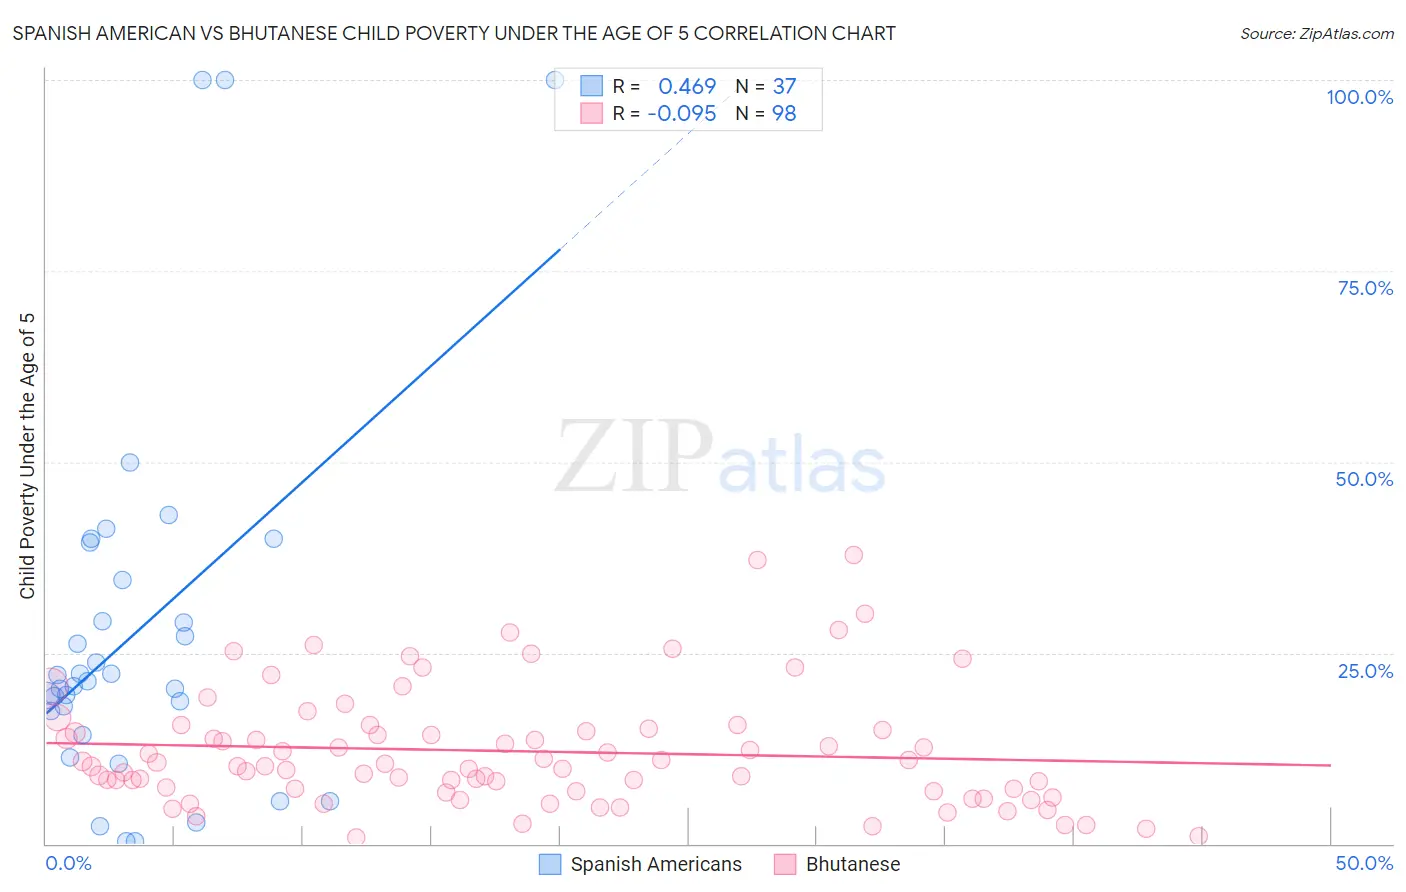 Spanish American vs Bhutanese Child Poverty Under the Age of 5